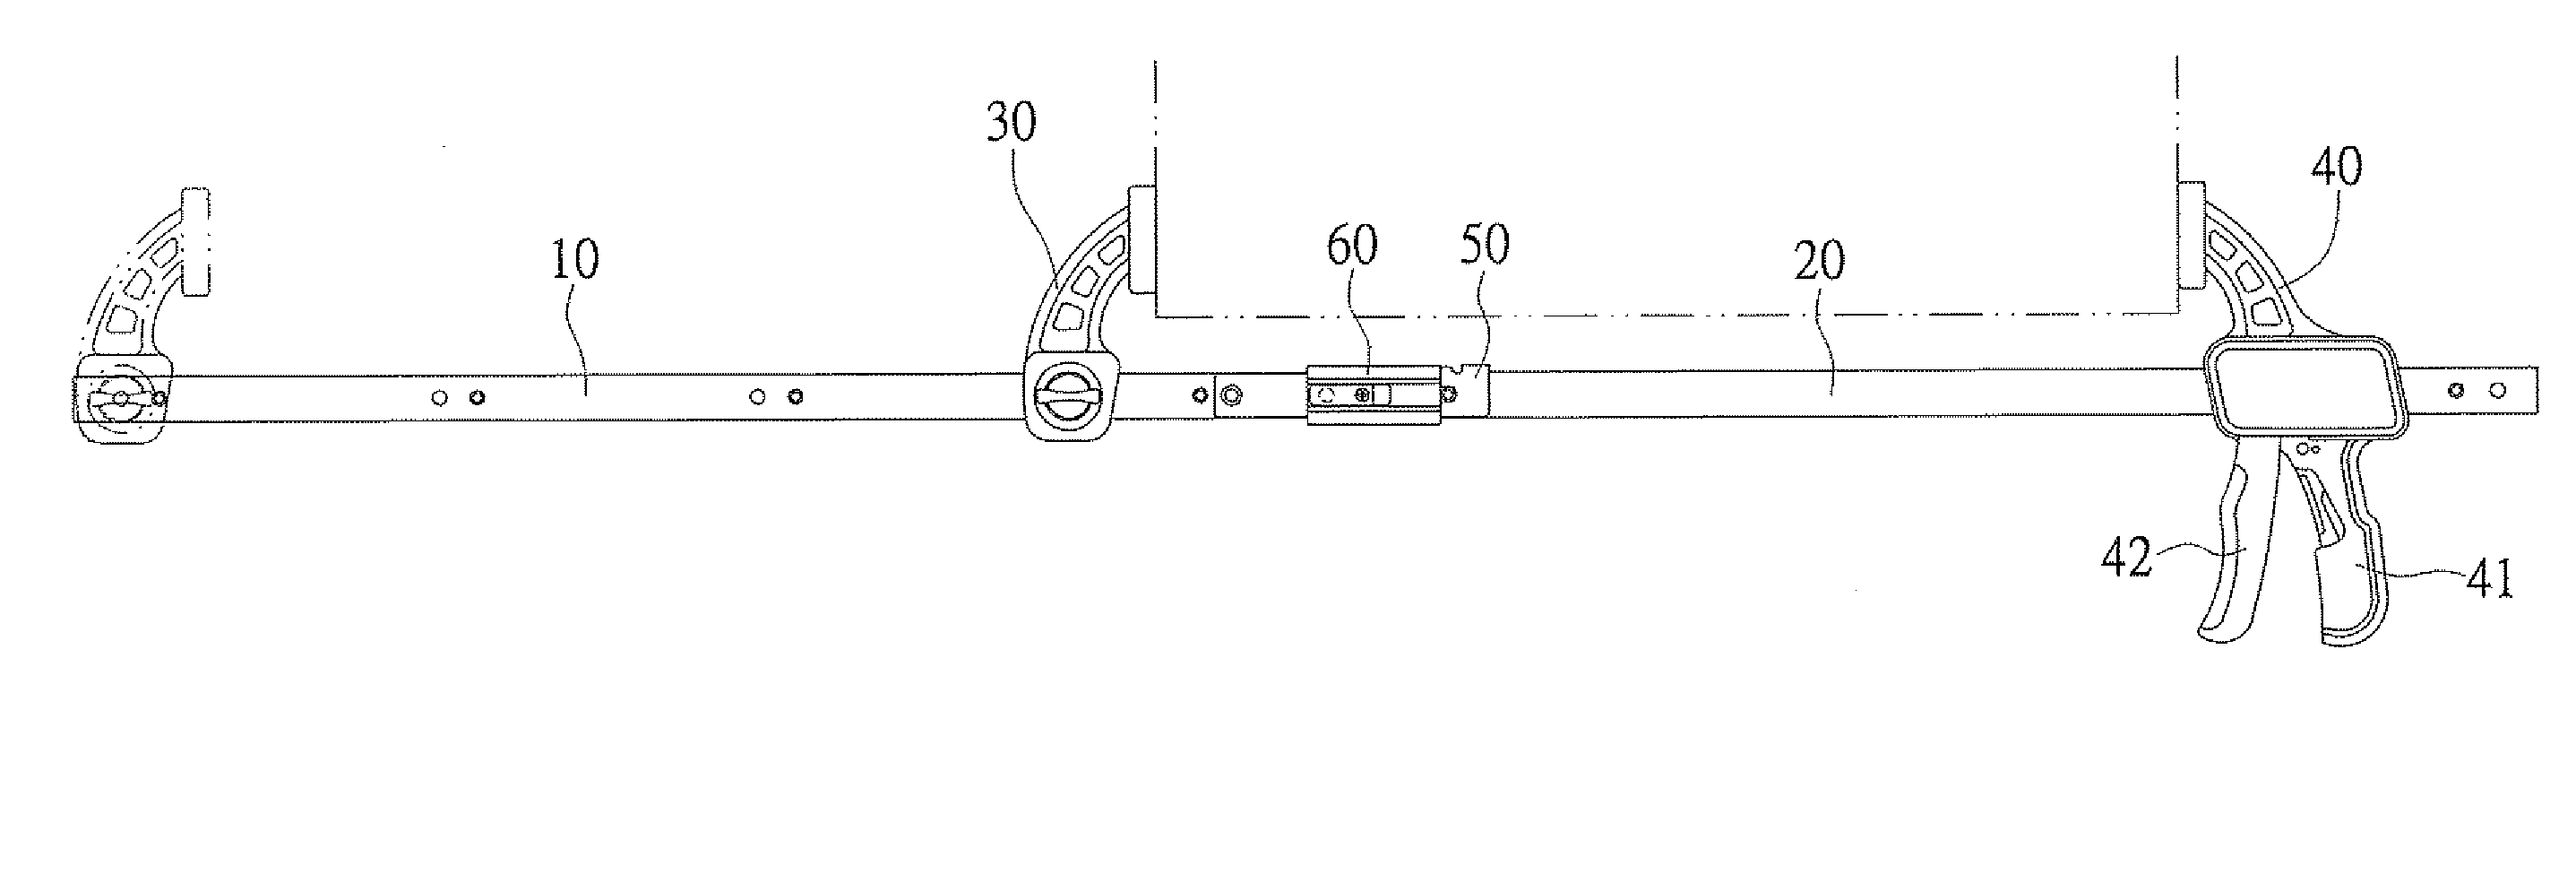 Slide extension locating system for a clamping apparatus